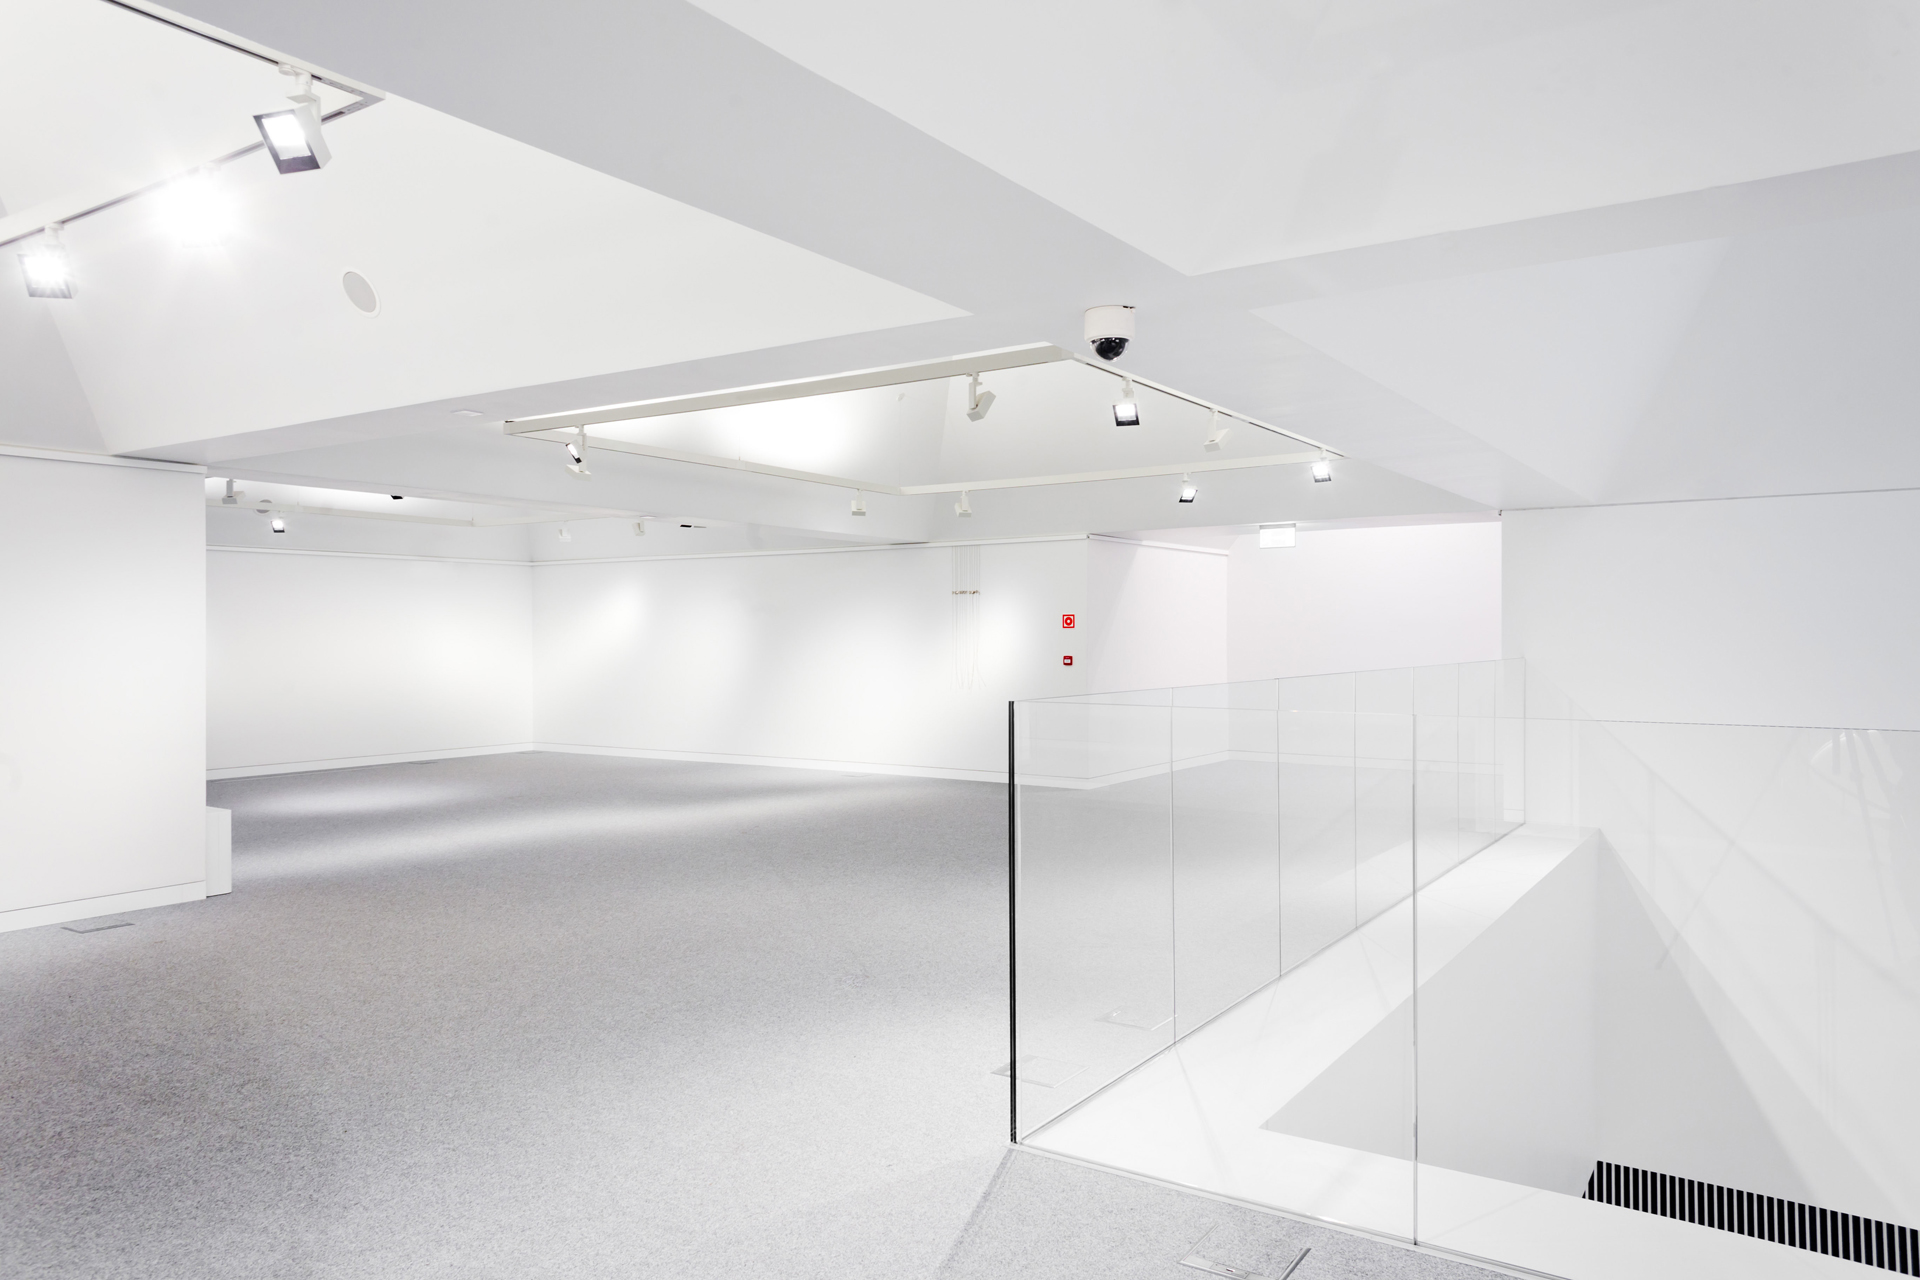 EXHIBITION SPACE – GALLERY LEVEL 4. 